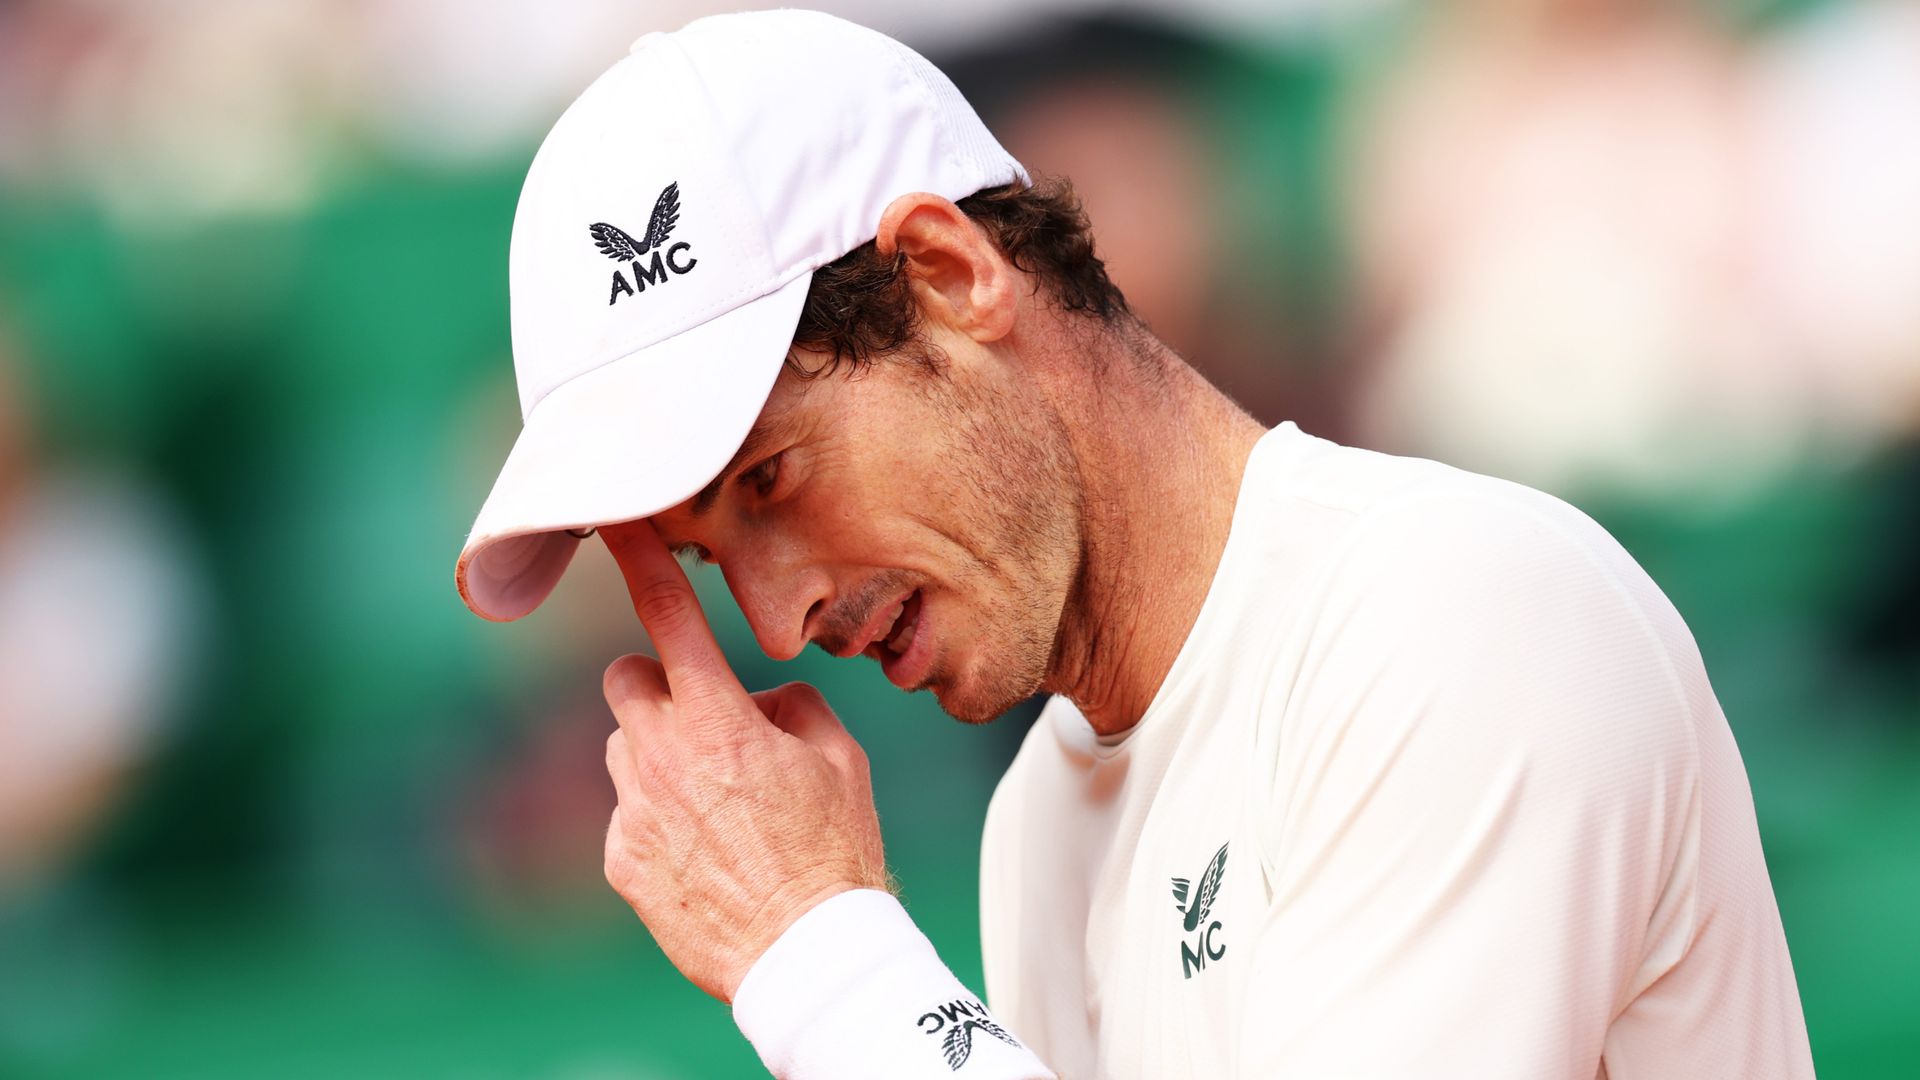 Murray beaten in straight sets by Rune in final Wimbledon tune-up